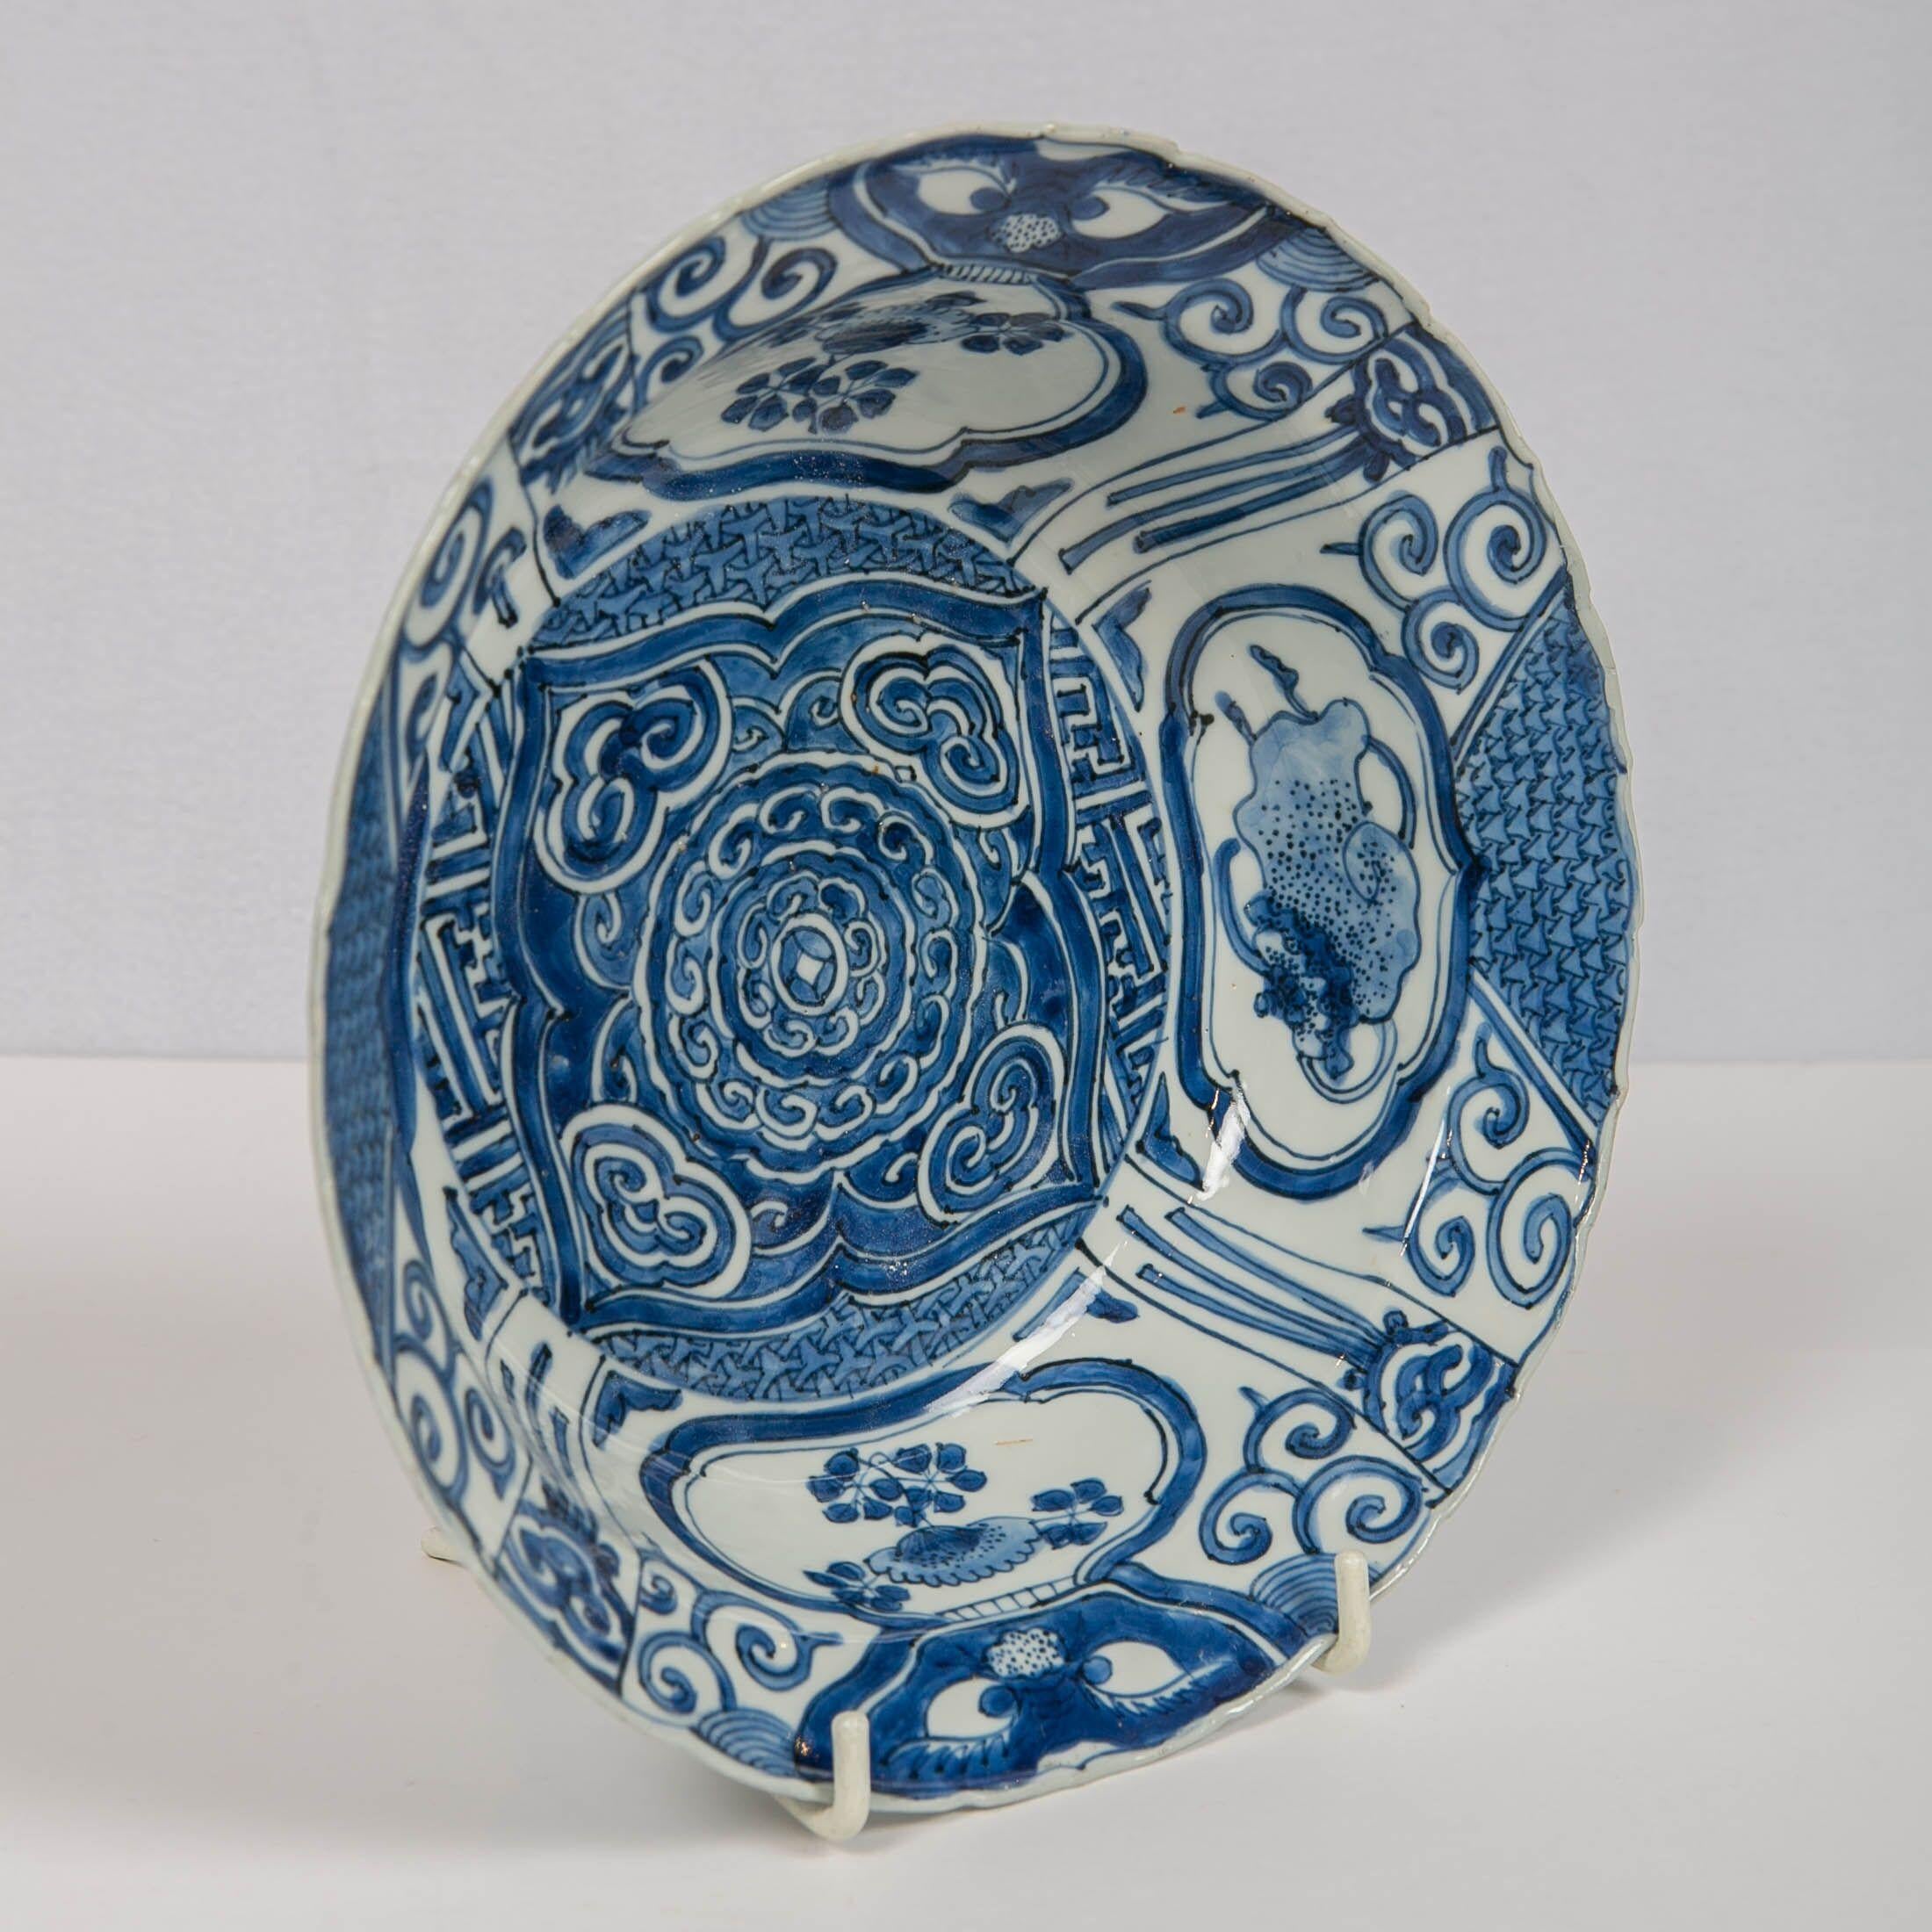 Mid-17th Century Chinese Blue and White Klapmuts Bowl Made in Reign of Chongzhen Emperor